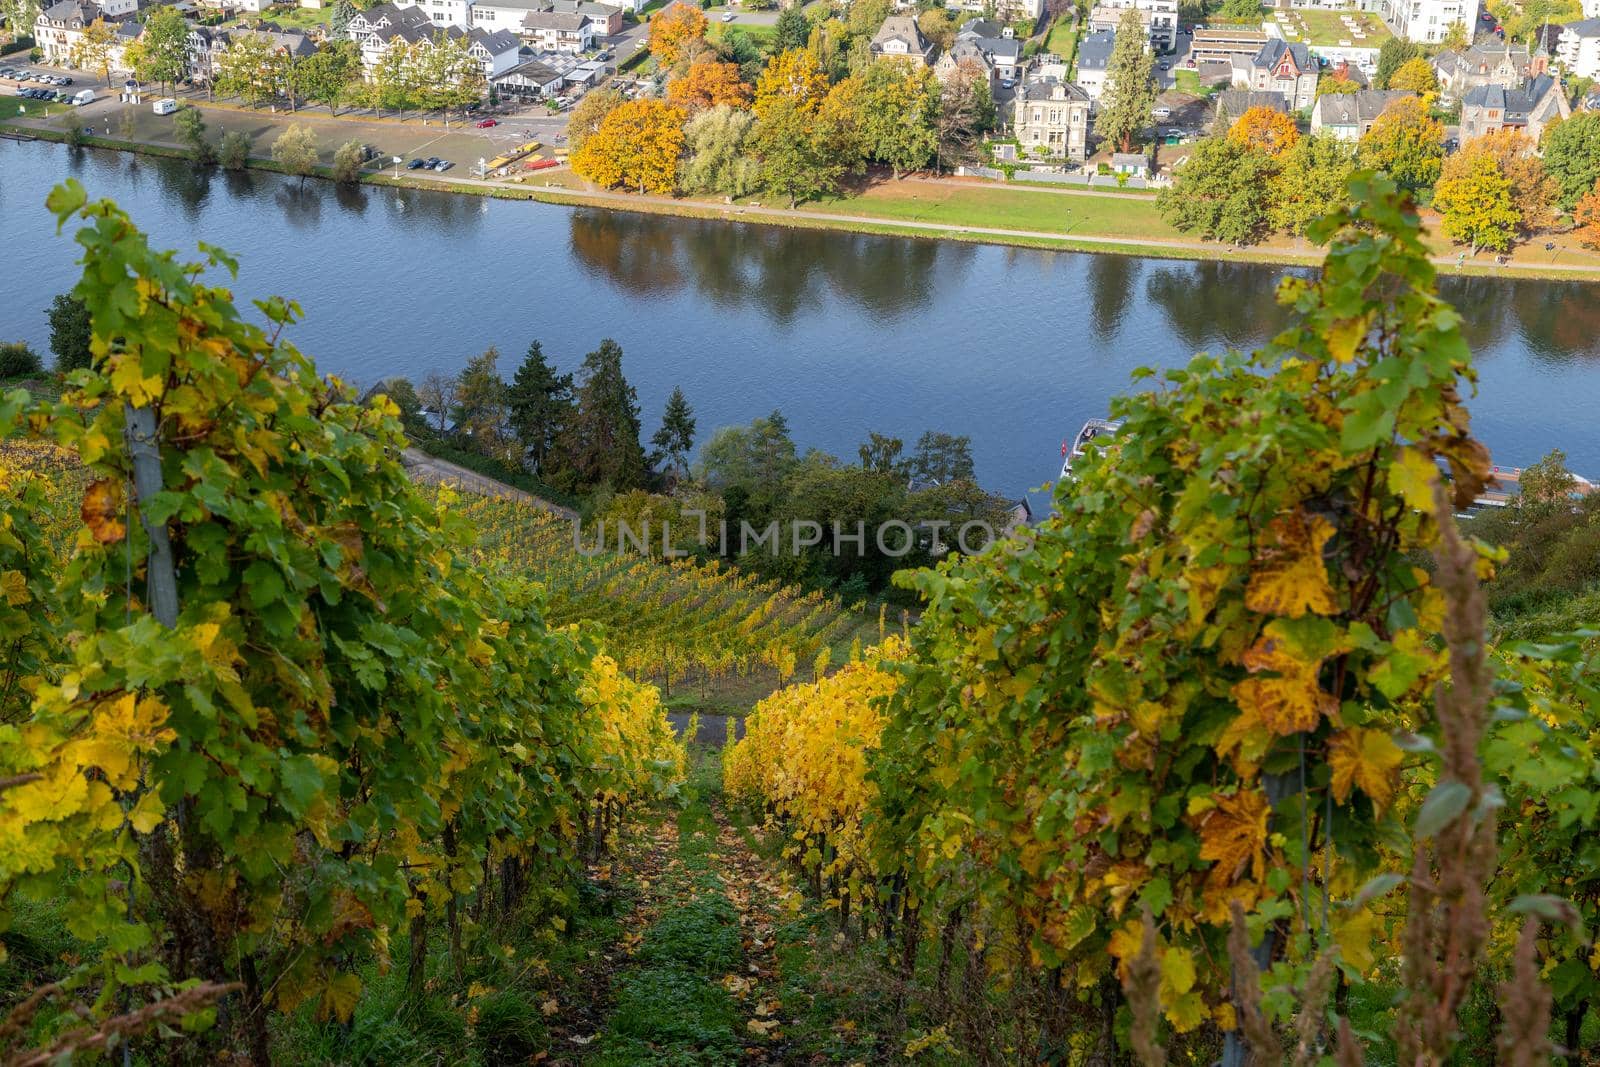 Bernkastel-Kues and the river Moselle in autumn with multi colored vineyard in the foreground by reinerc